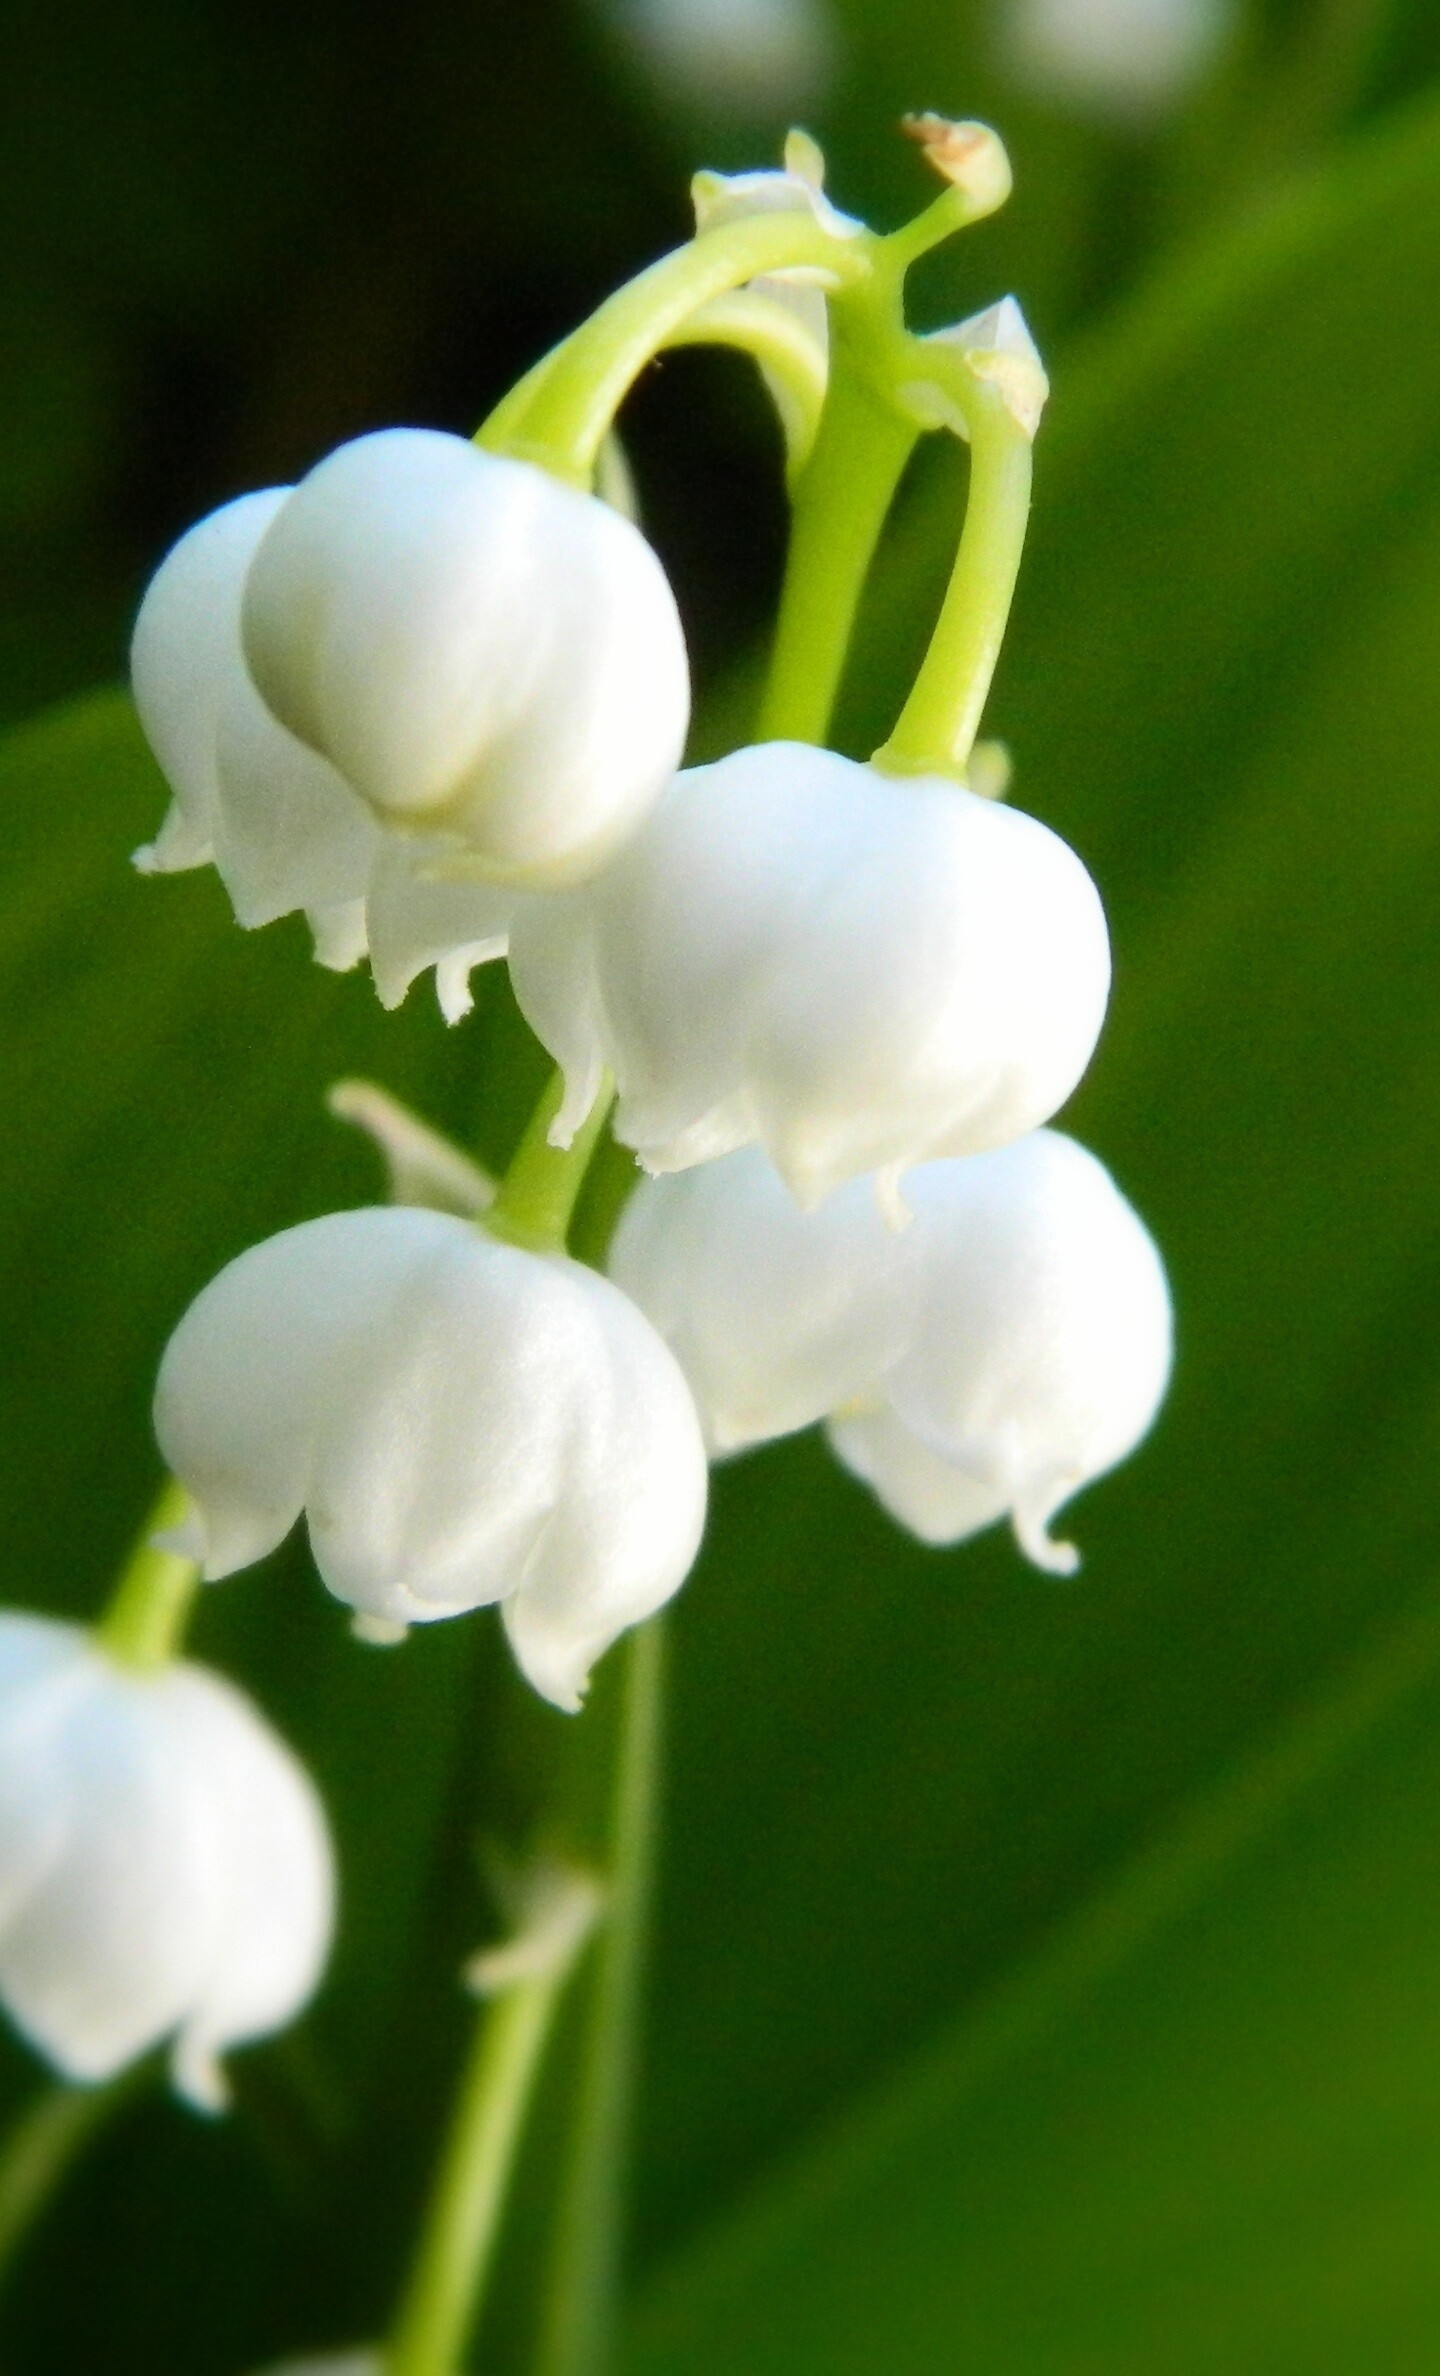 Lily of the Valley: Mary’s tears, Herbaceous plant. 1440x2380 HD Wallpaper.